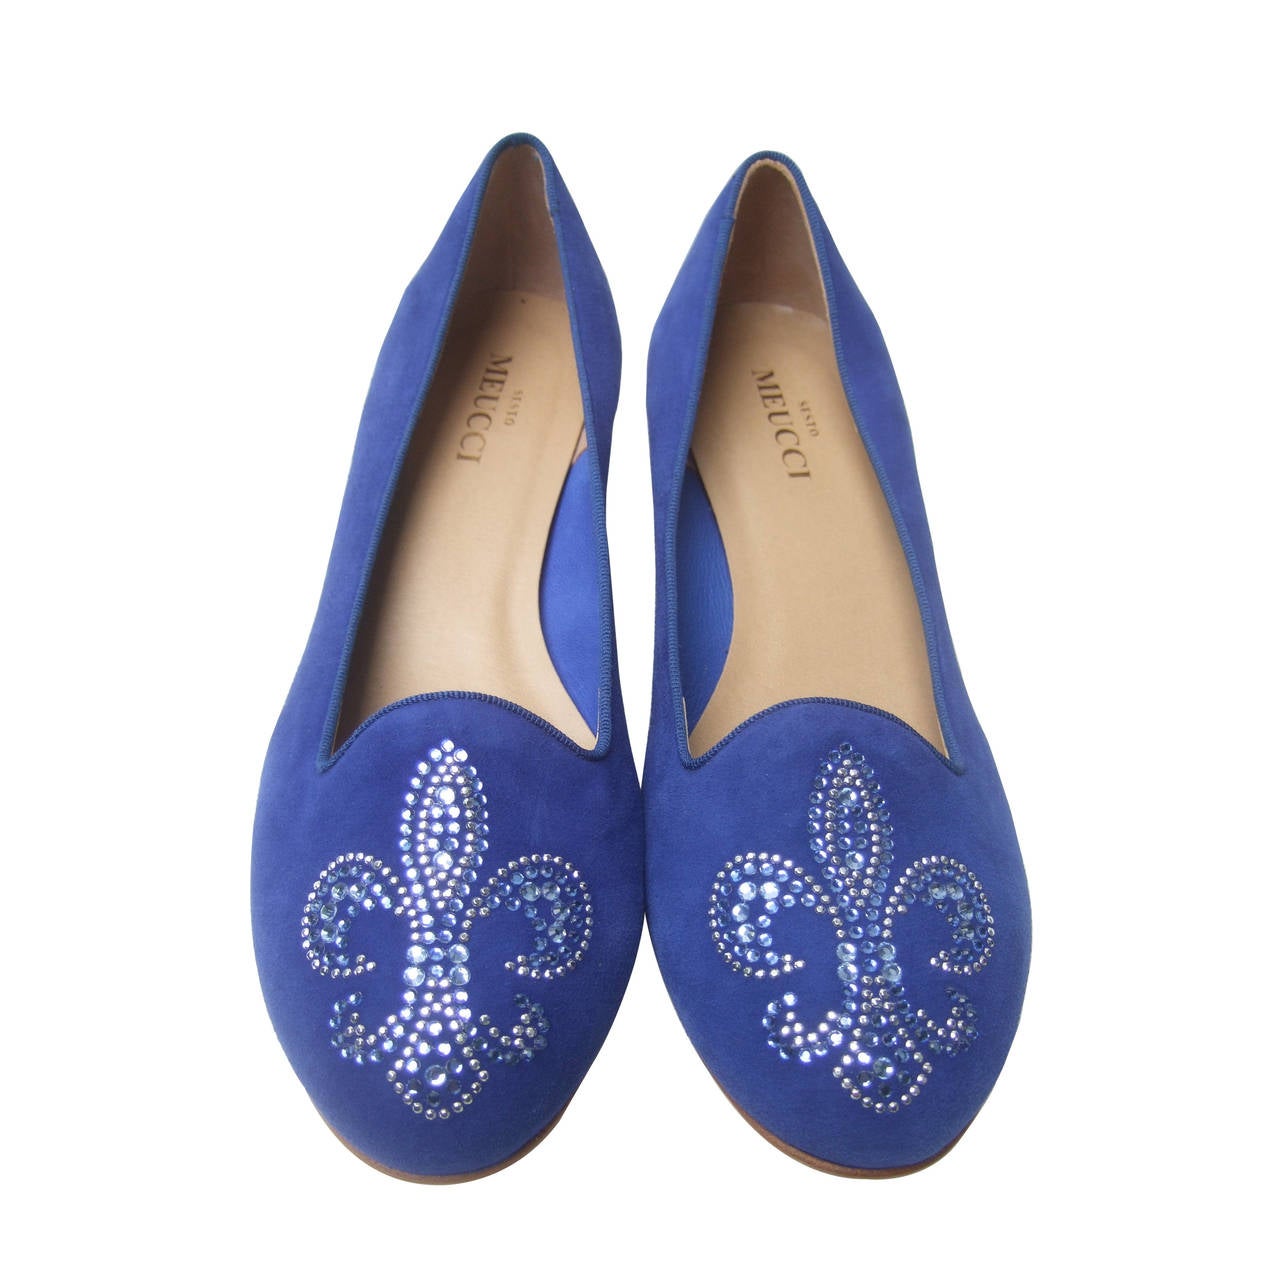 Crystal Jeweled Fleur di Lis Peacock Blue Suede Flats Made in Italy US Size 10 M For Sale